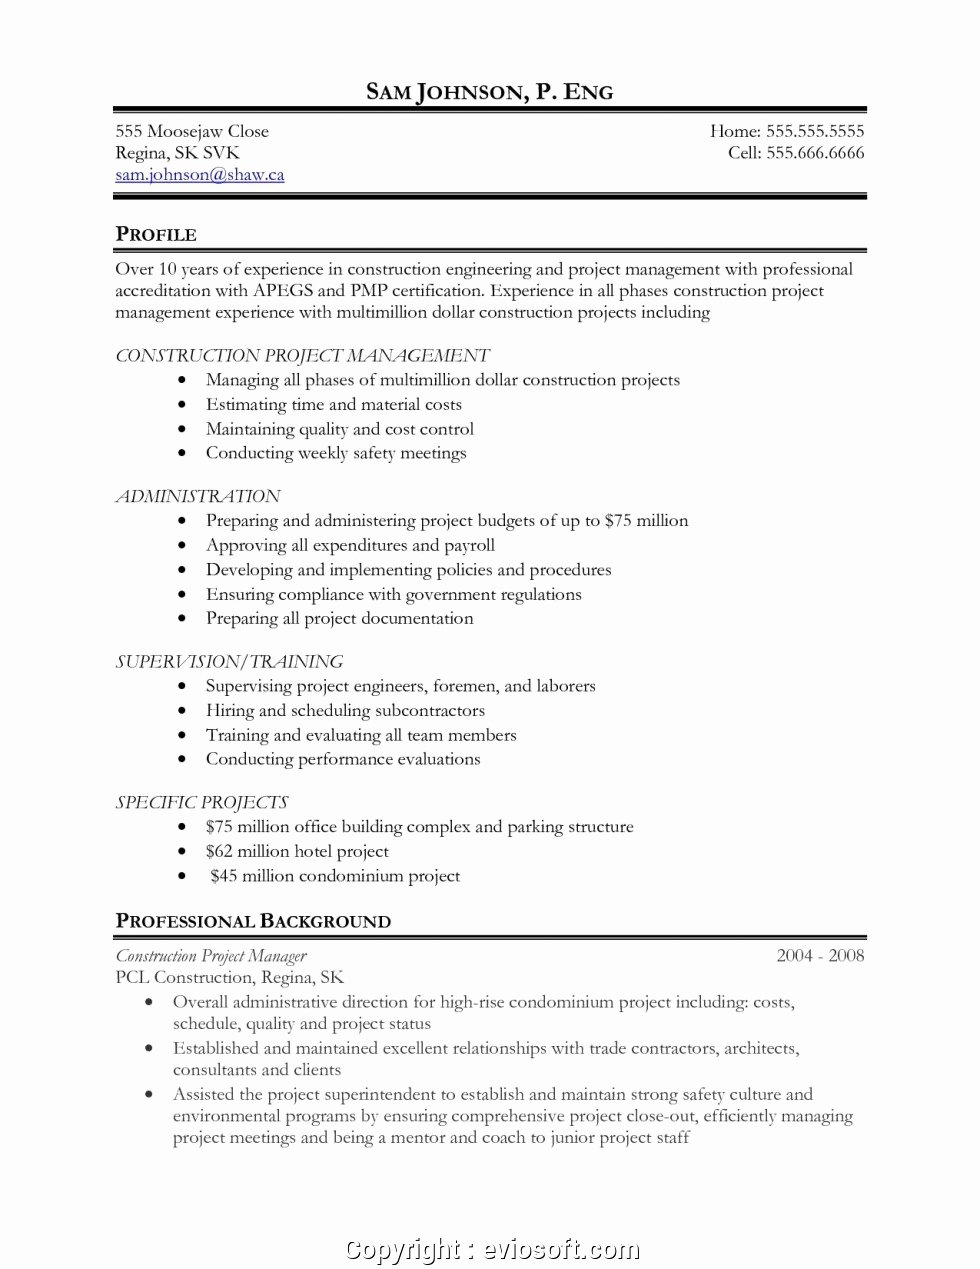 Project Manager Resume Sample Doc Luxury Simply Construction Project Manager Resume Sample Doc It Project Manager Resume Sample Doc